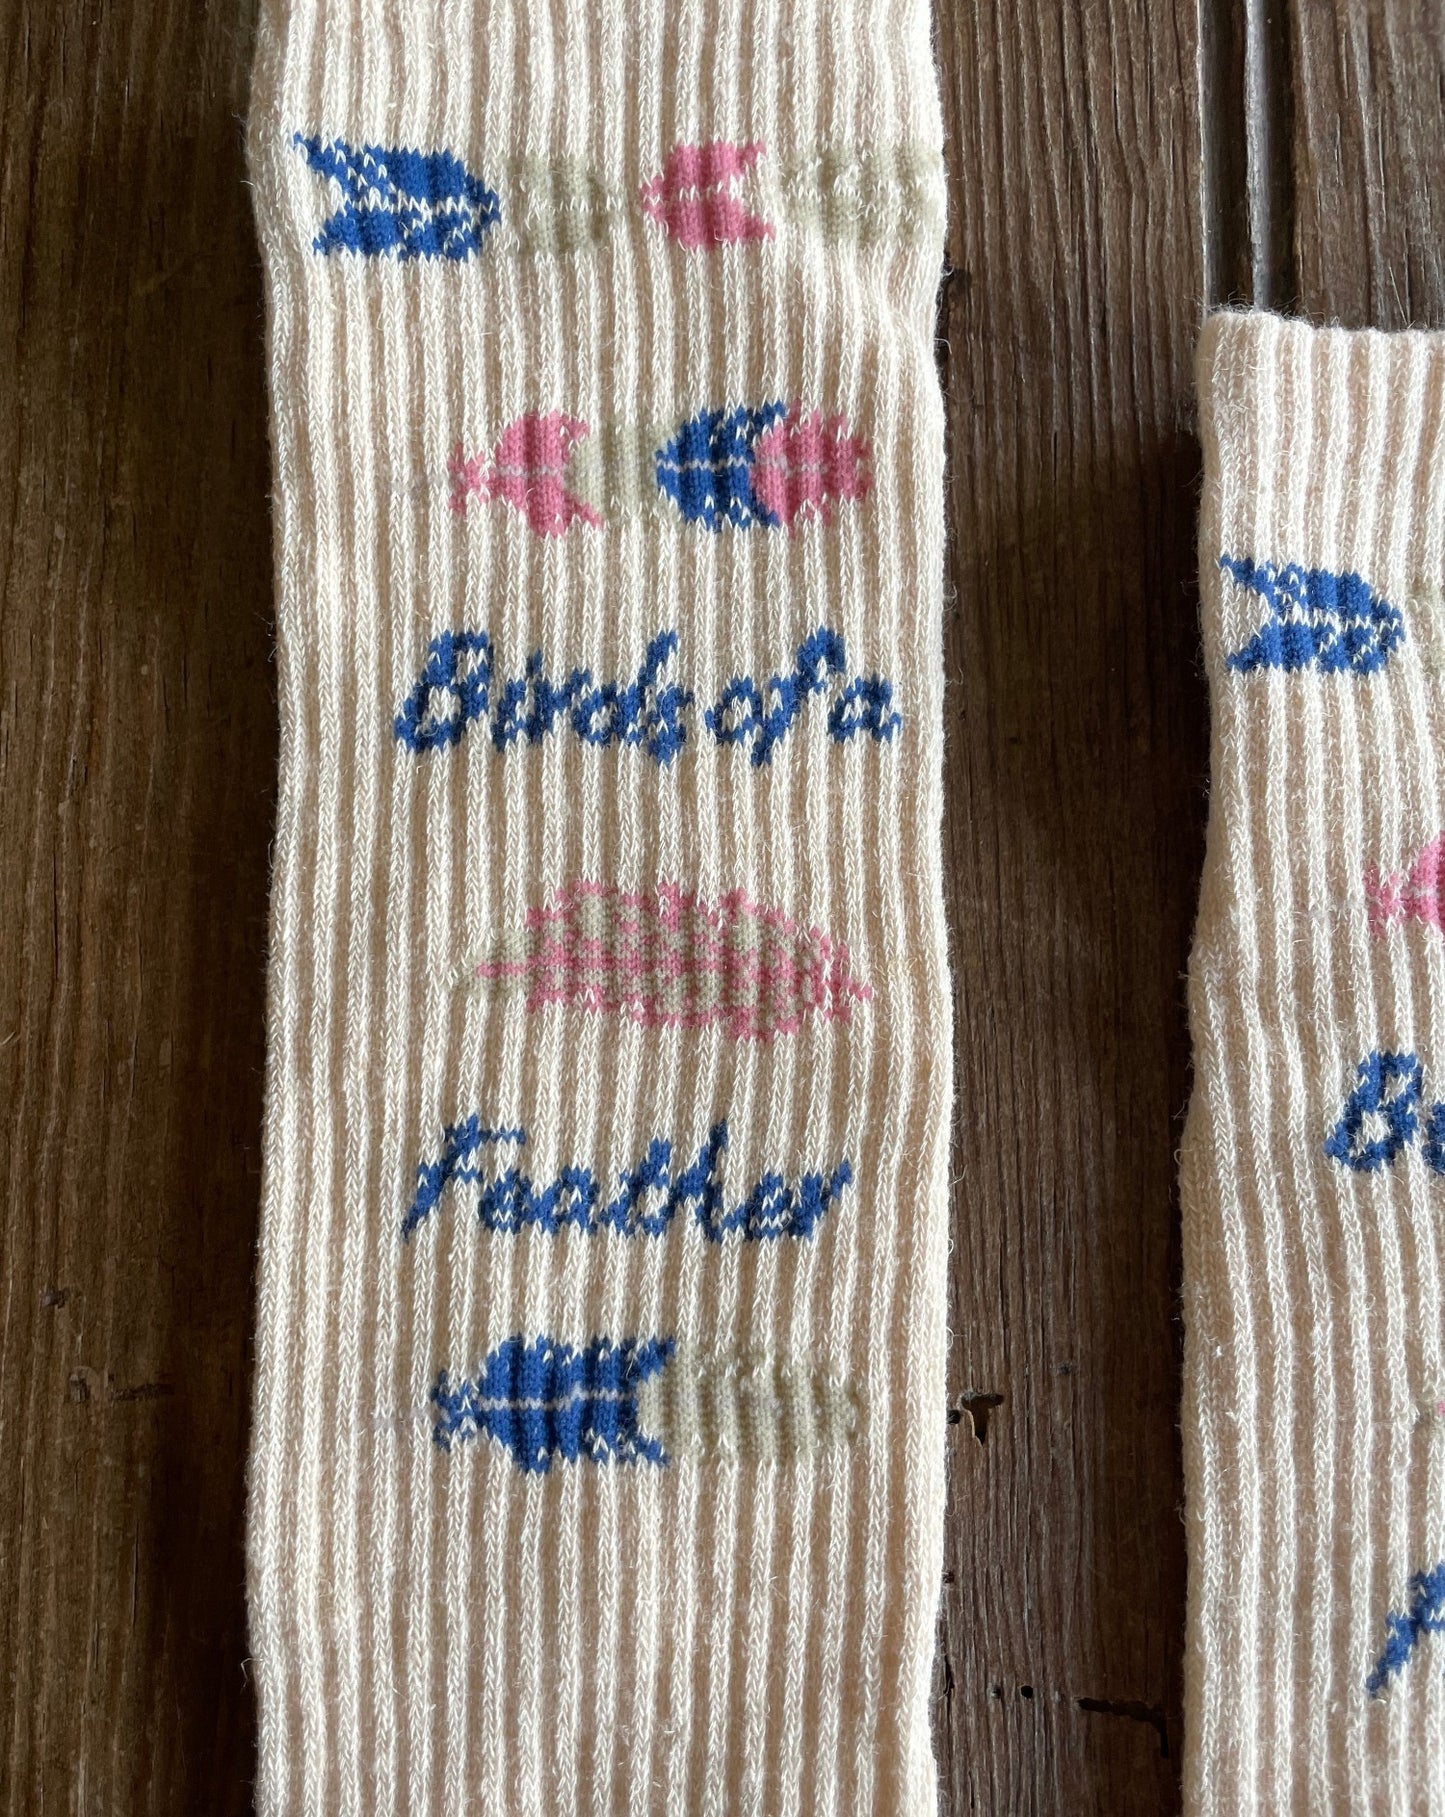 Birds of a Feather Performance Crew Socks